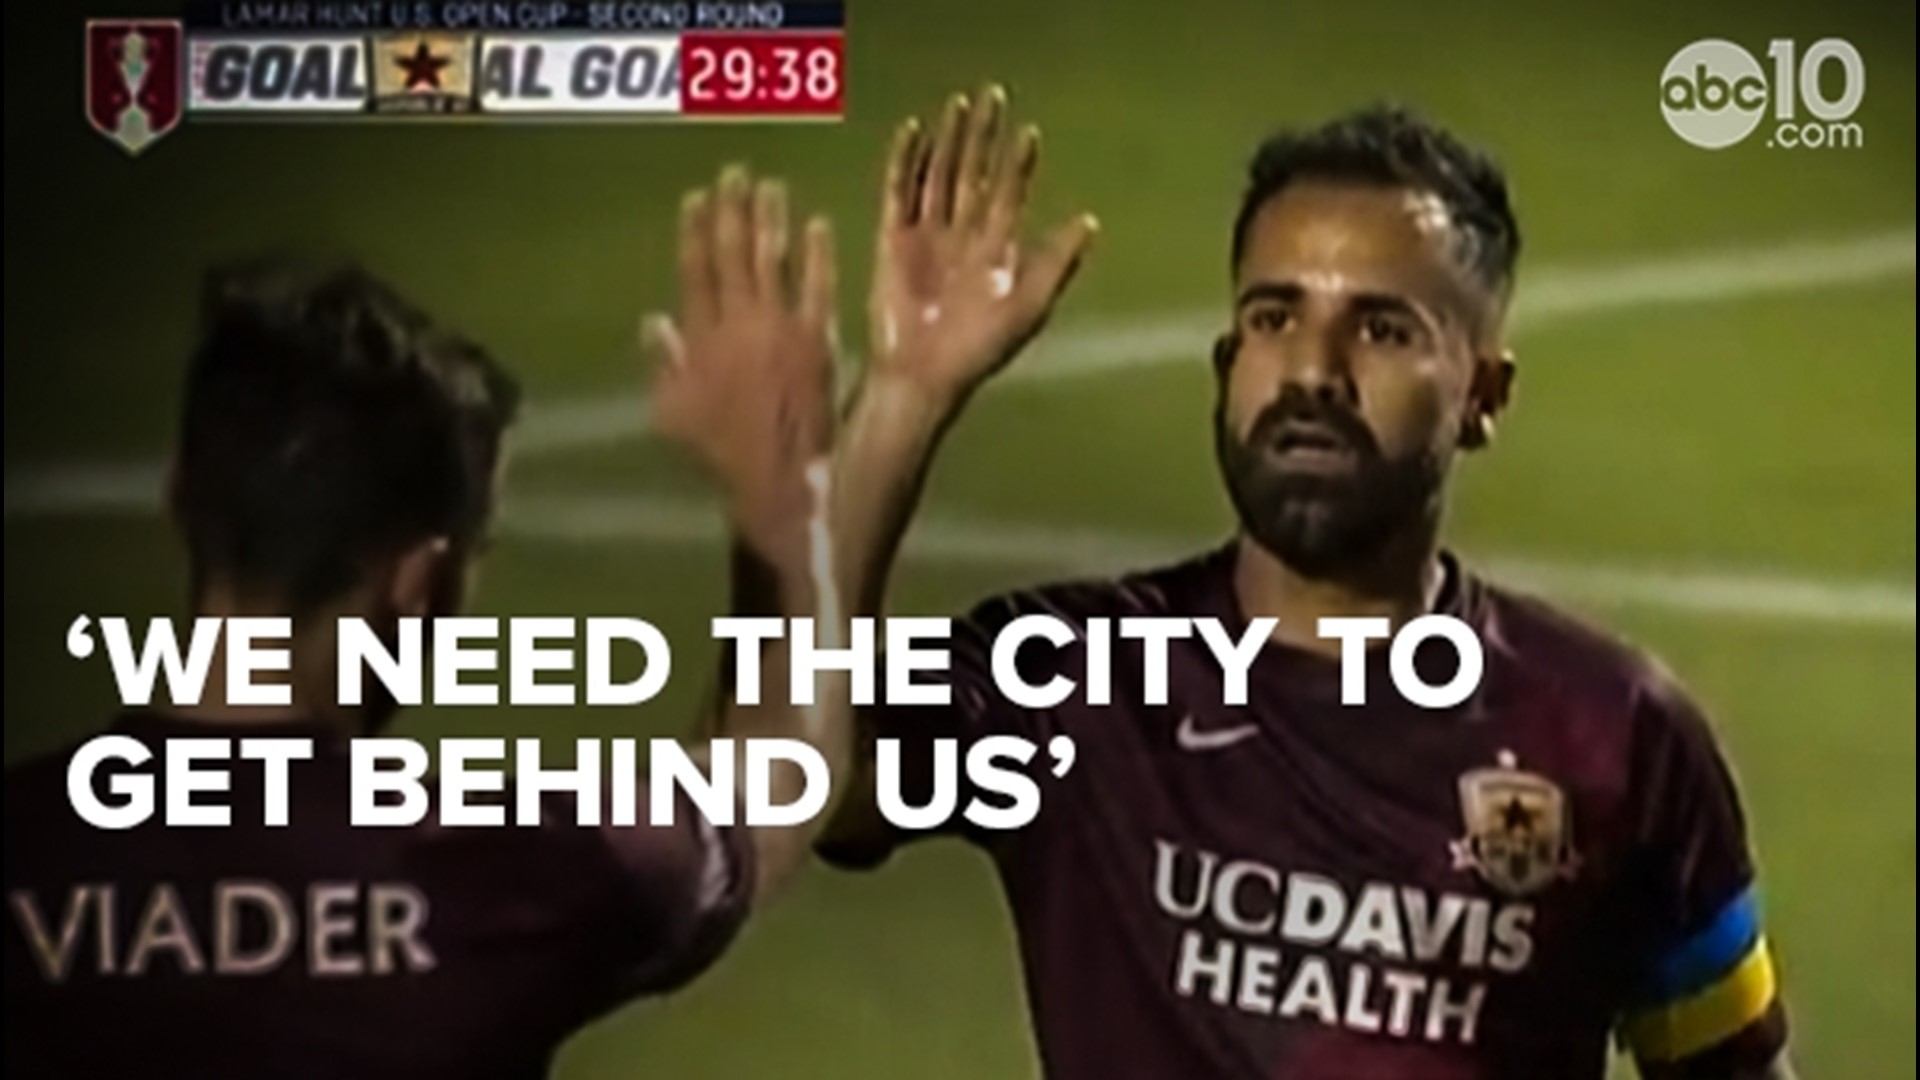 The soccer or football club from Sacramento, Republic FC, has been 15-1 in all time during US Open Cup tournaments at home.